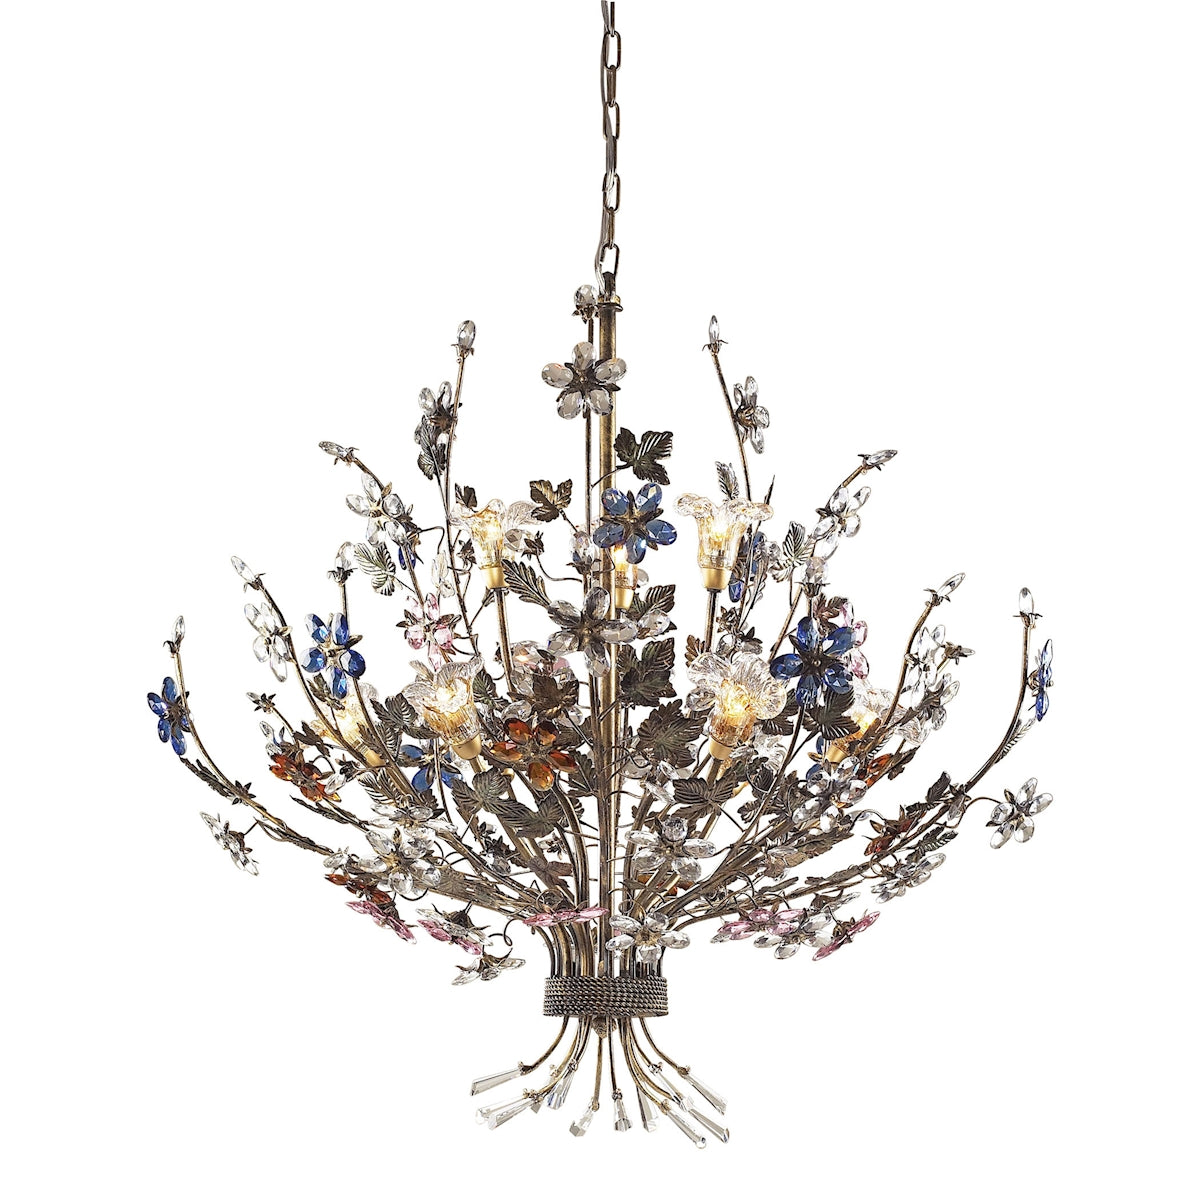 ELK Lighting 9108/6+3 Brillare 9-Light Chandelier in Bronzed Rust with Multi-colored Floral Crystals